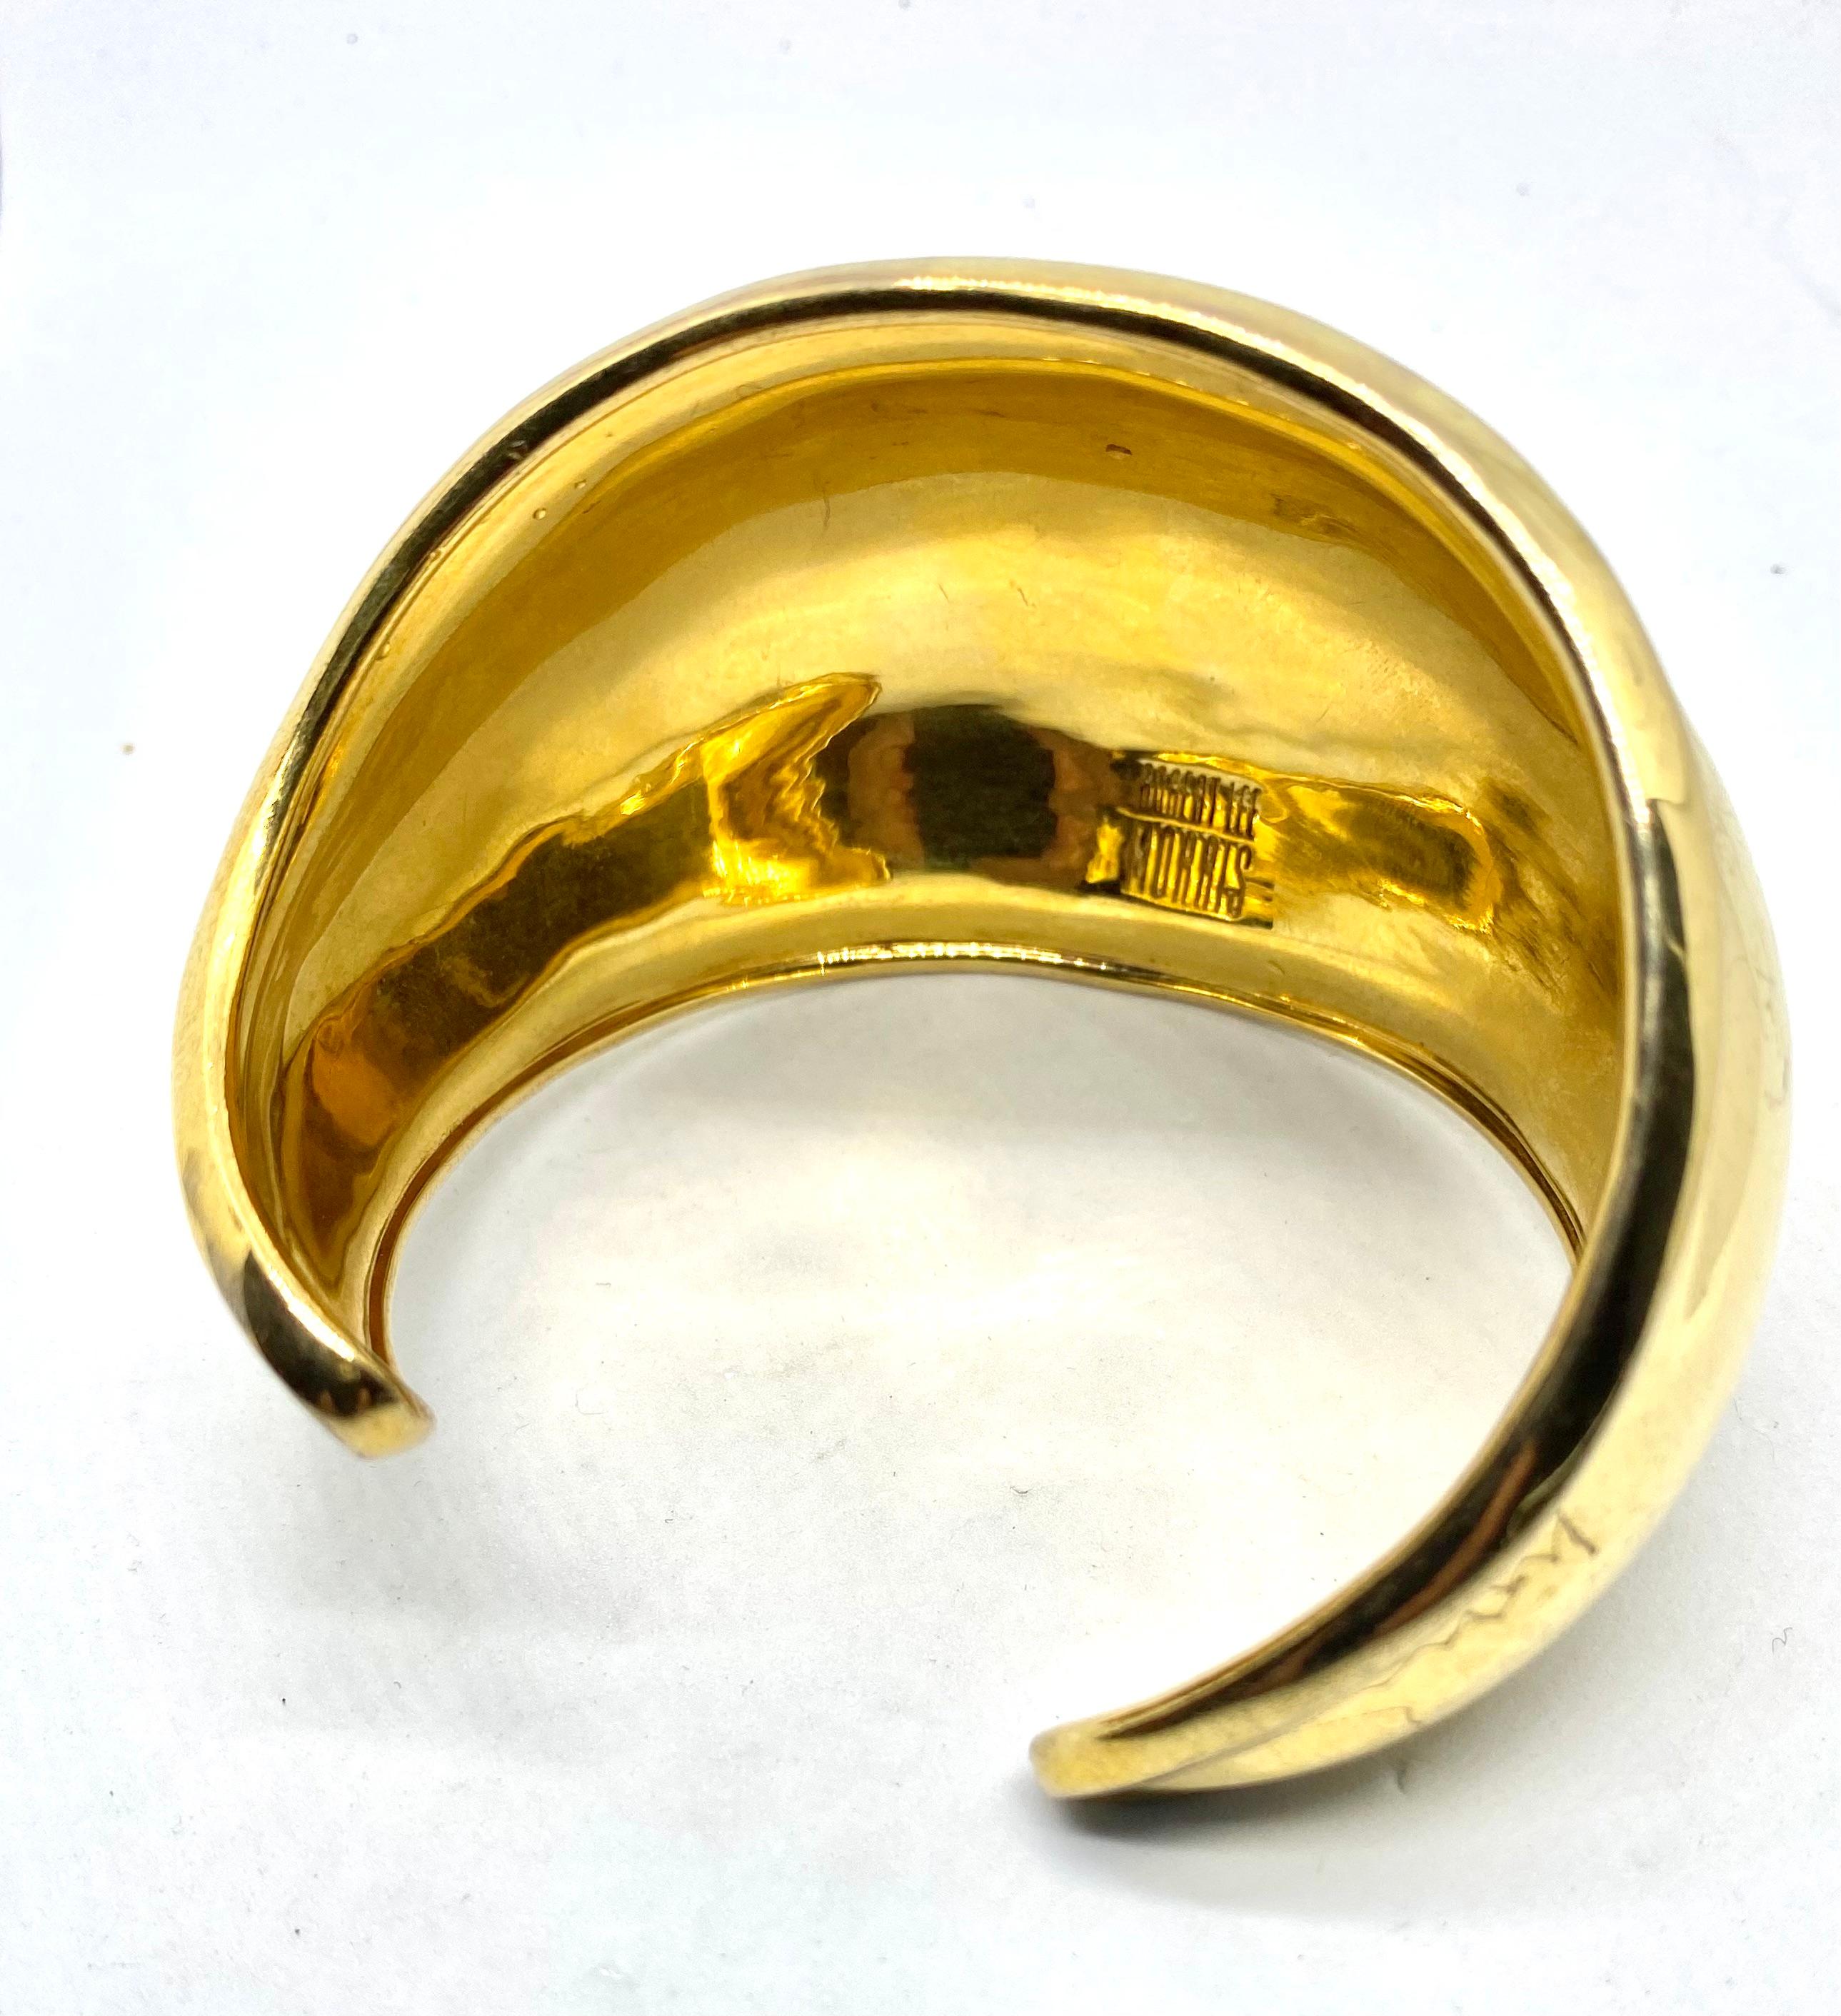 This is one of the most loved and wearable matte gold plated brass cuffs in the entire range of Robert Lee Morris bracelets. Created in the mid 1970's and named small Beta Cuff, due to its twisting form, this piece is one of his most popular. Easy